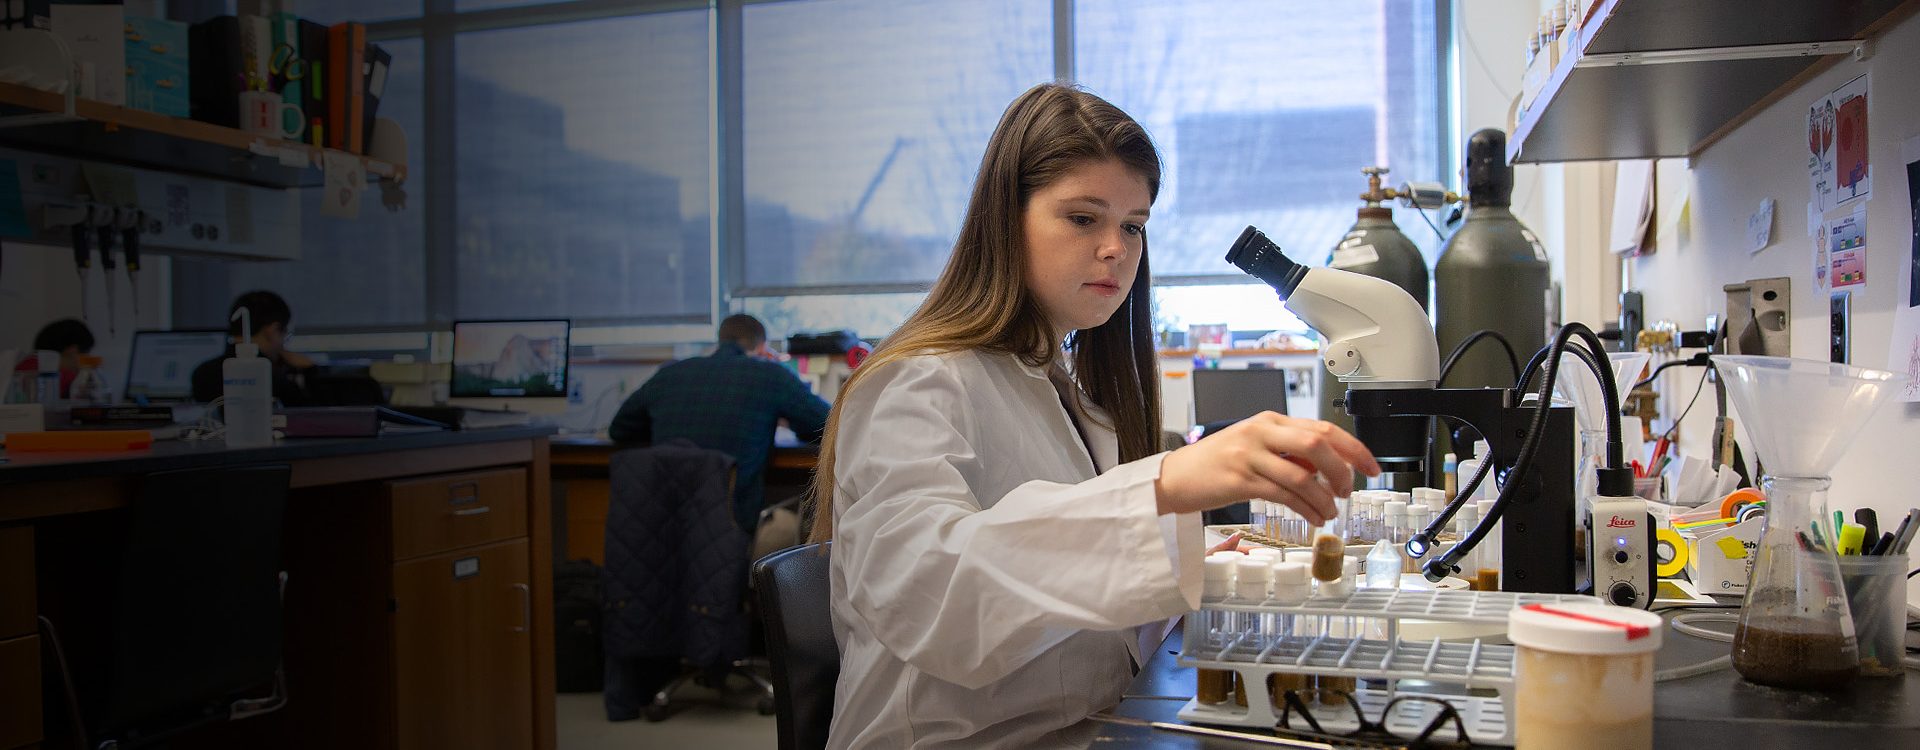 A student analyzes samples in a research lab